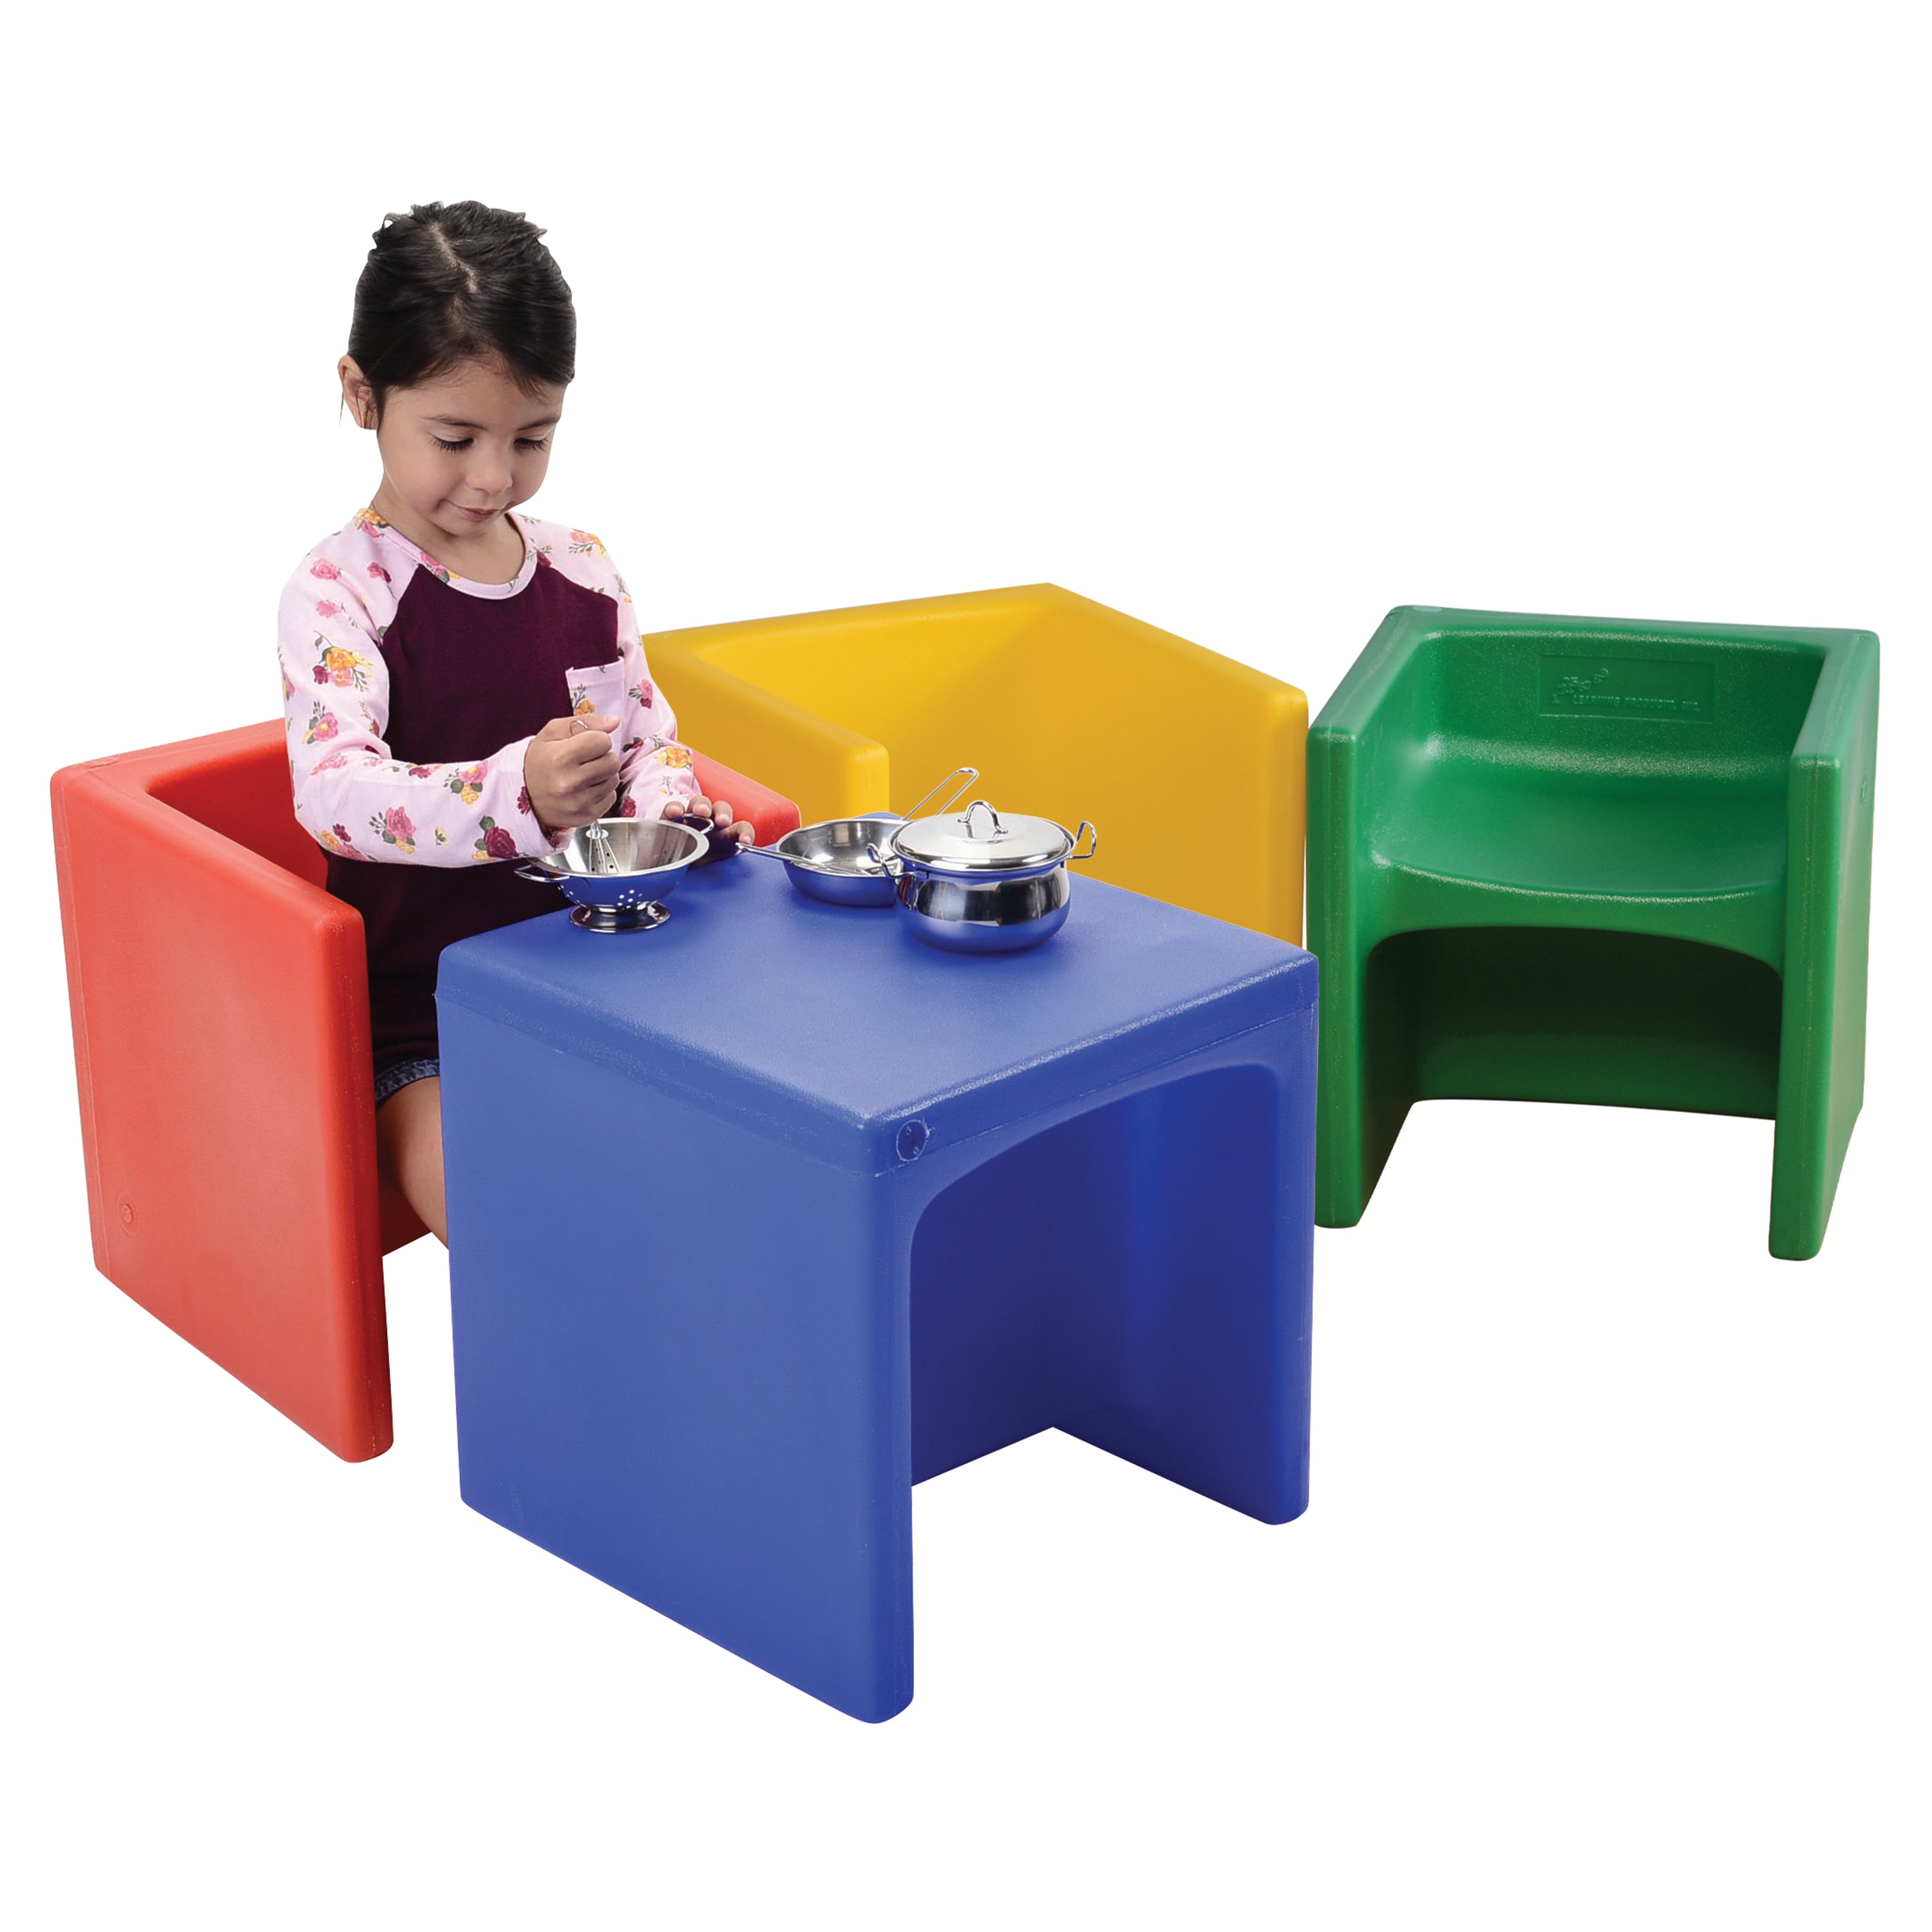 Cube Chairs Set of 8